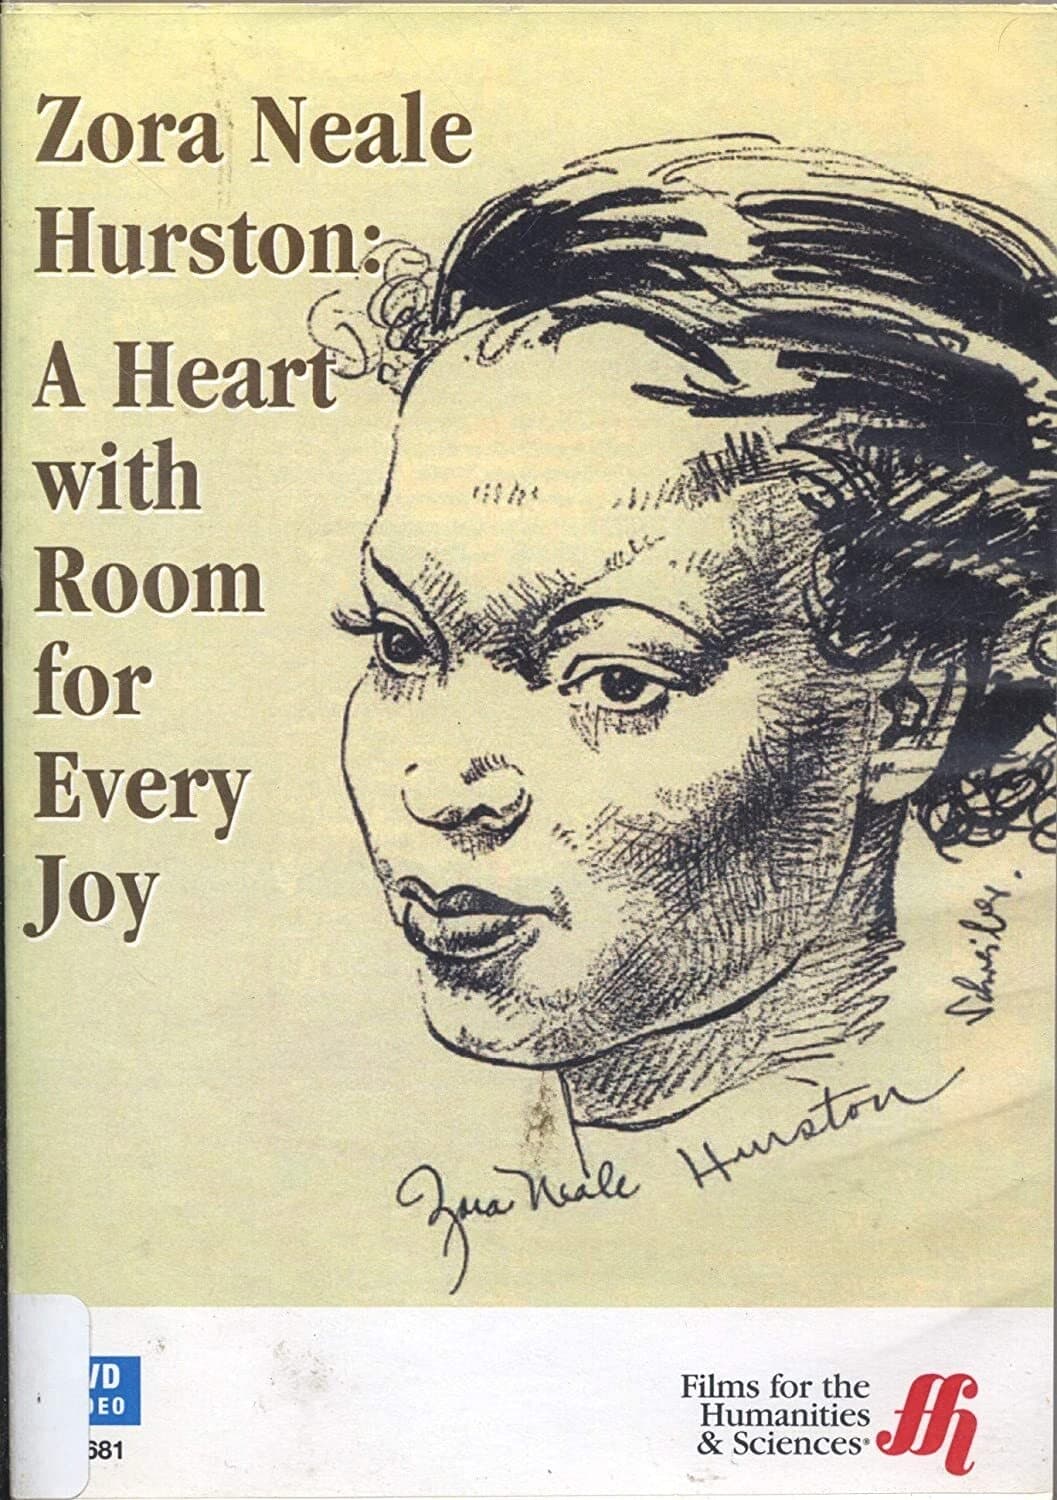 Zora Neale Hurston: A Heart with Room for Every Joy